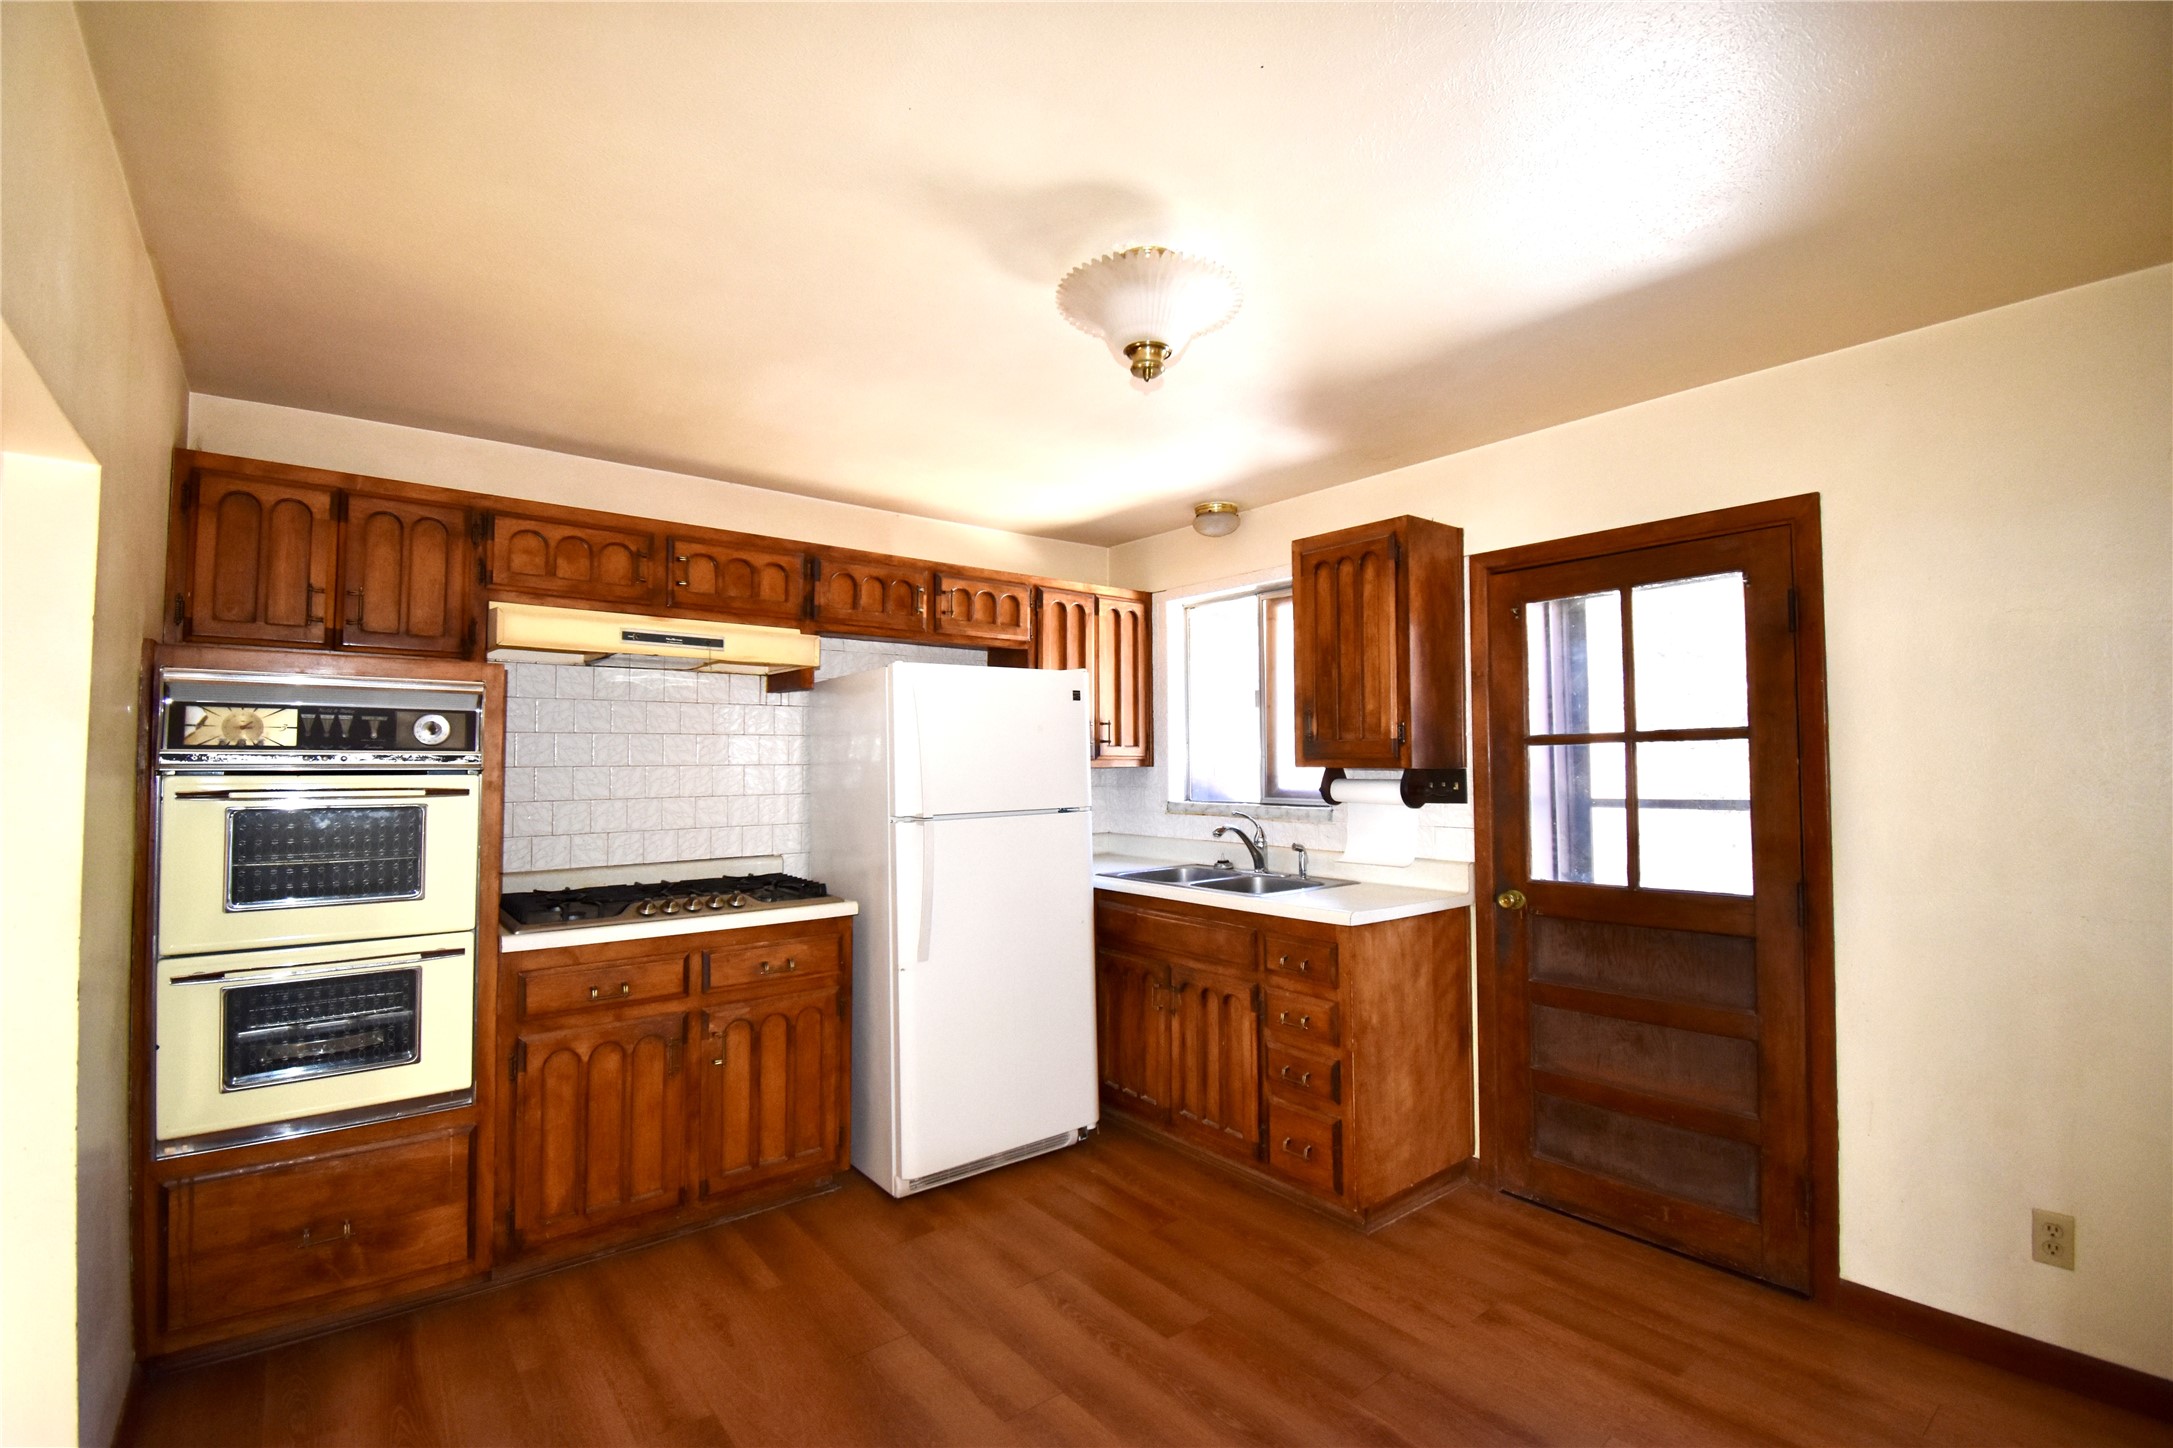 1300 Canyon Road, Santa Fe, New Mexico 87501, 3 Bedrooms Bedrooms, ,1 BathroomBathrooms,Residential,For Sale,1300 Canyon Road,202400670